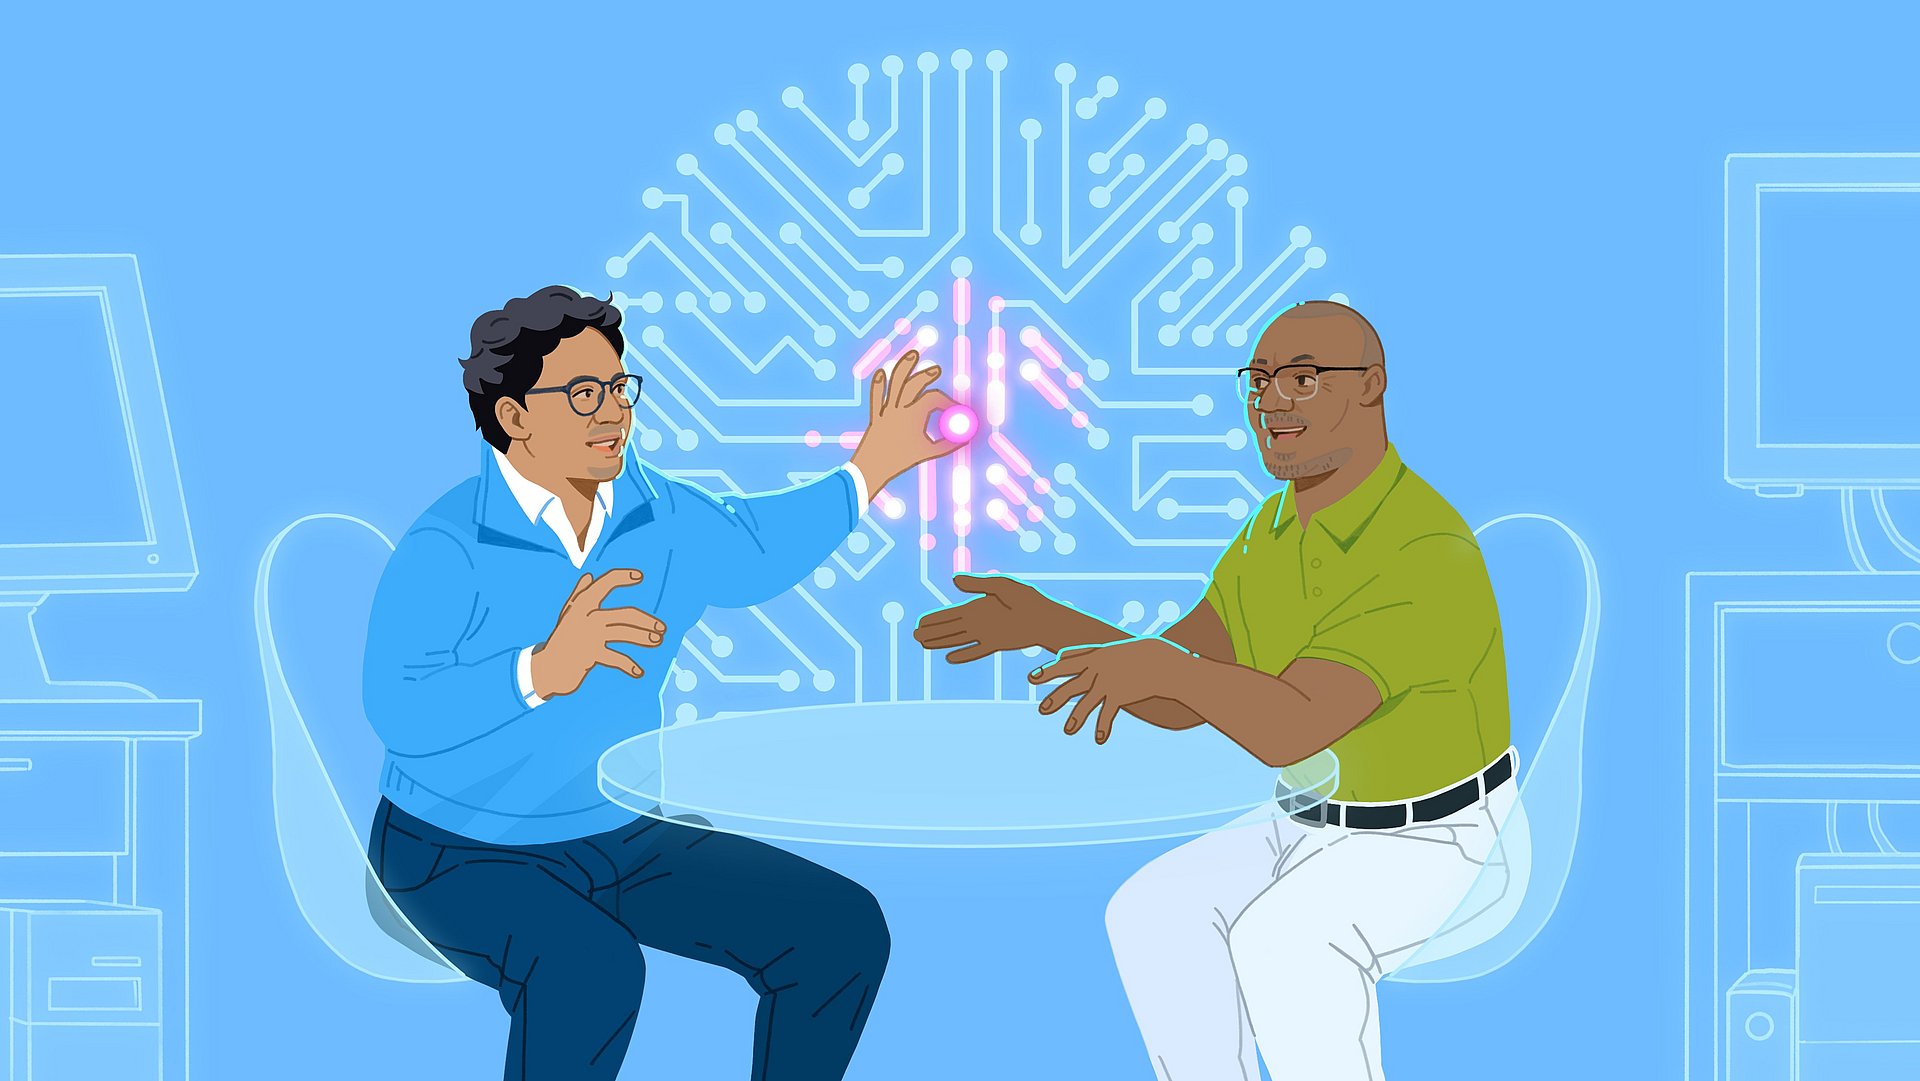 Aldo Faisal, professor for AI and neuroscience at Imperial College London, speaks with John Jerry Kponyo, professor of telecomunnications engineering at Kwame Nkrumah' University of Science and Technology